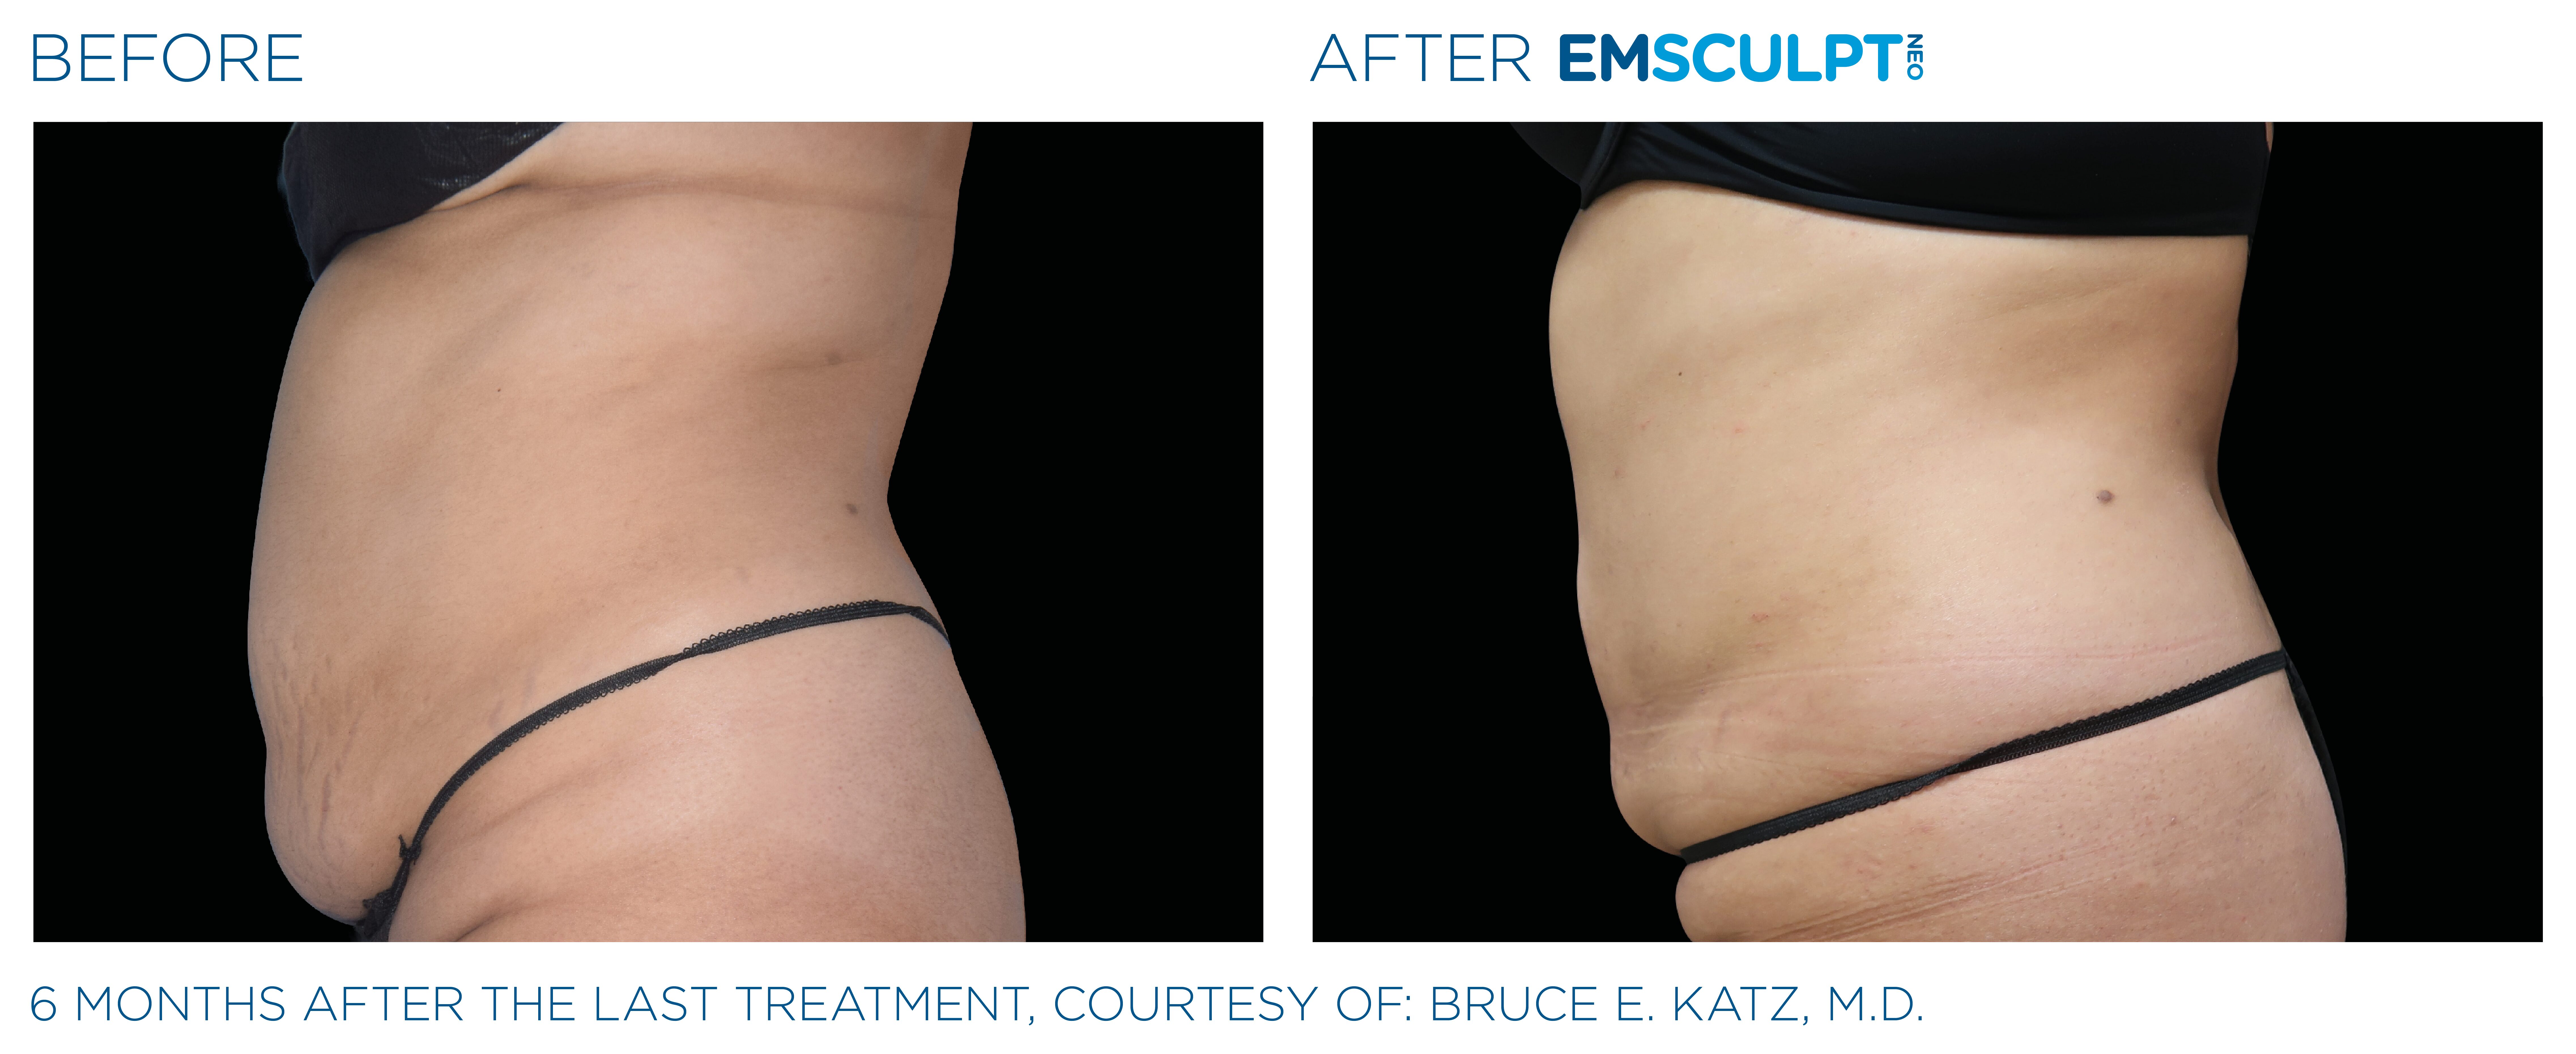 Lose weight and improve metabolism with emsculpt neo in seattle